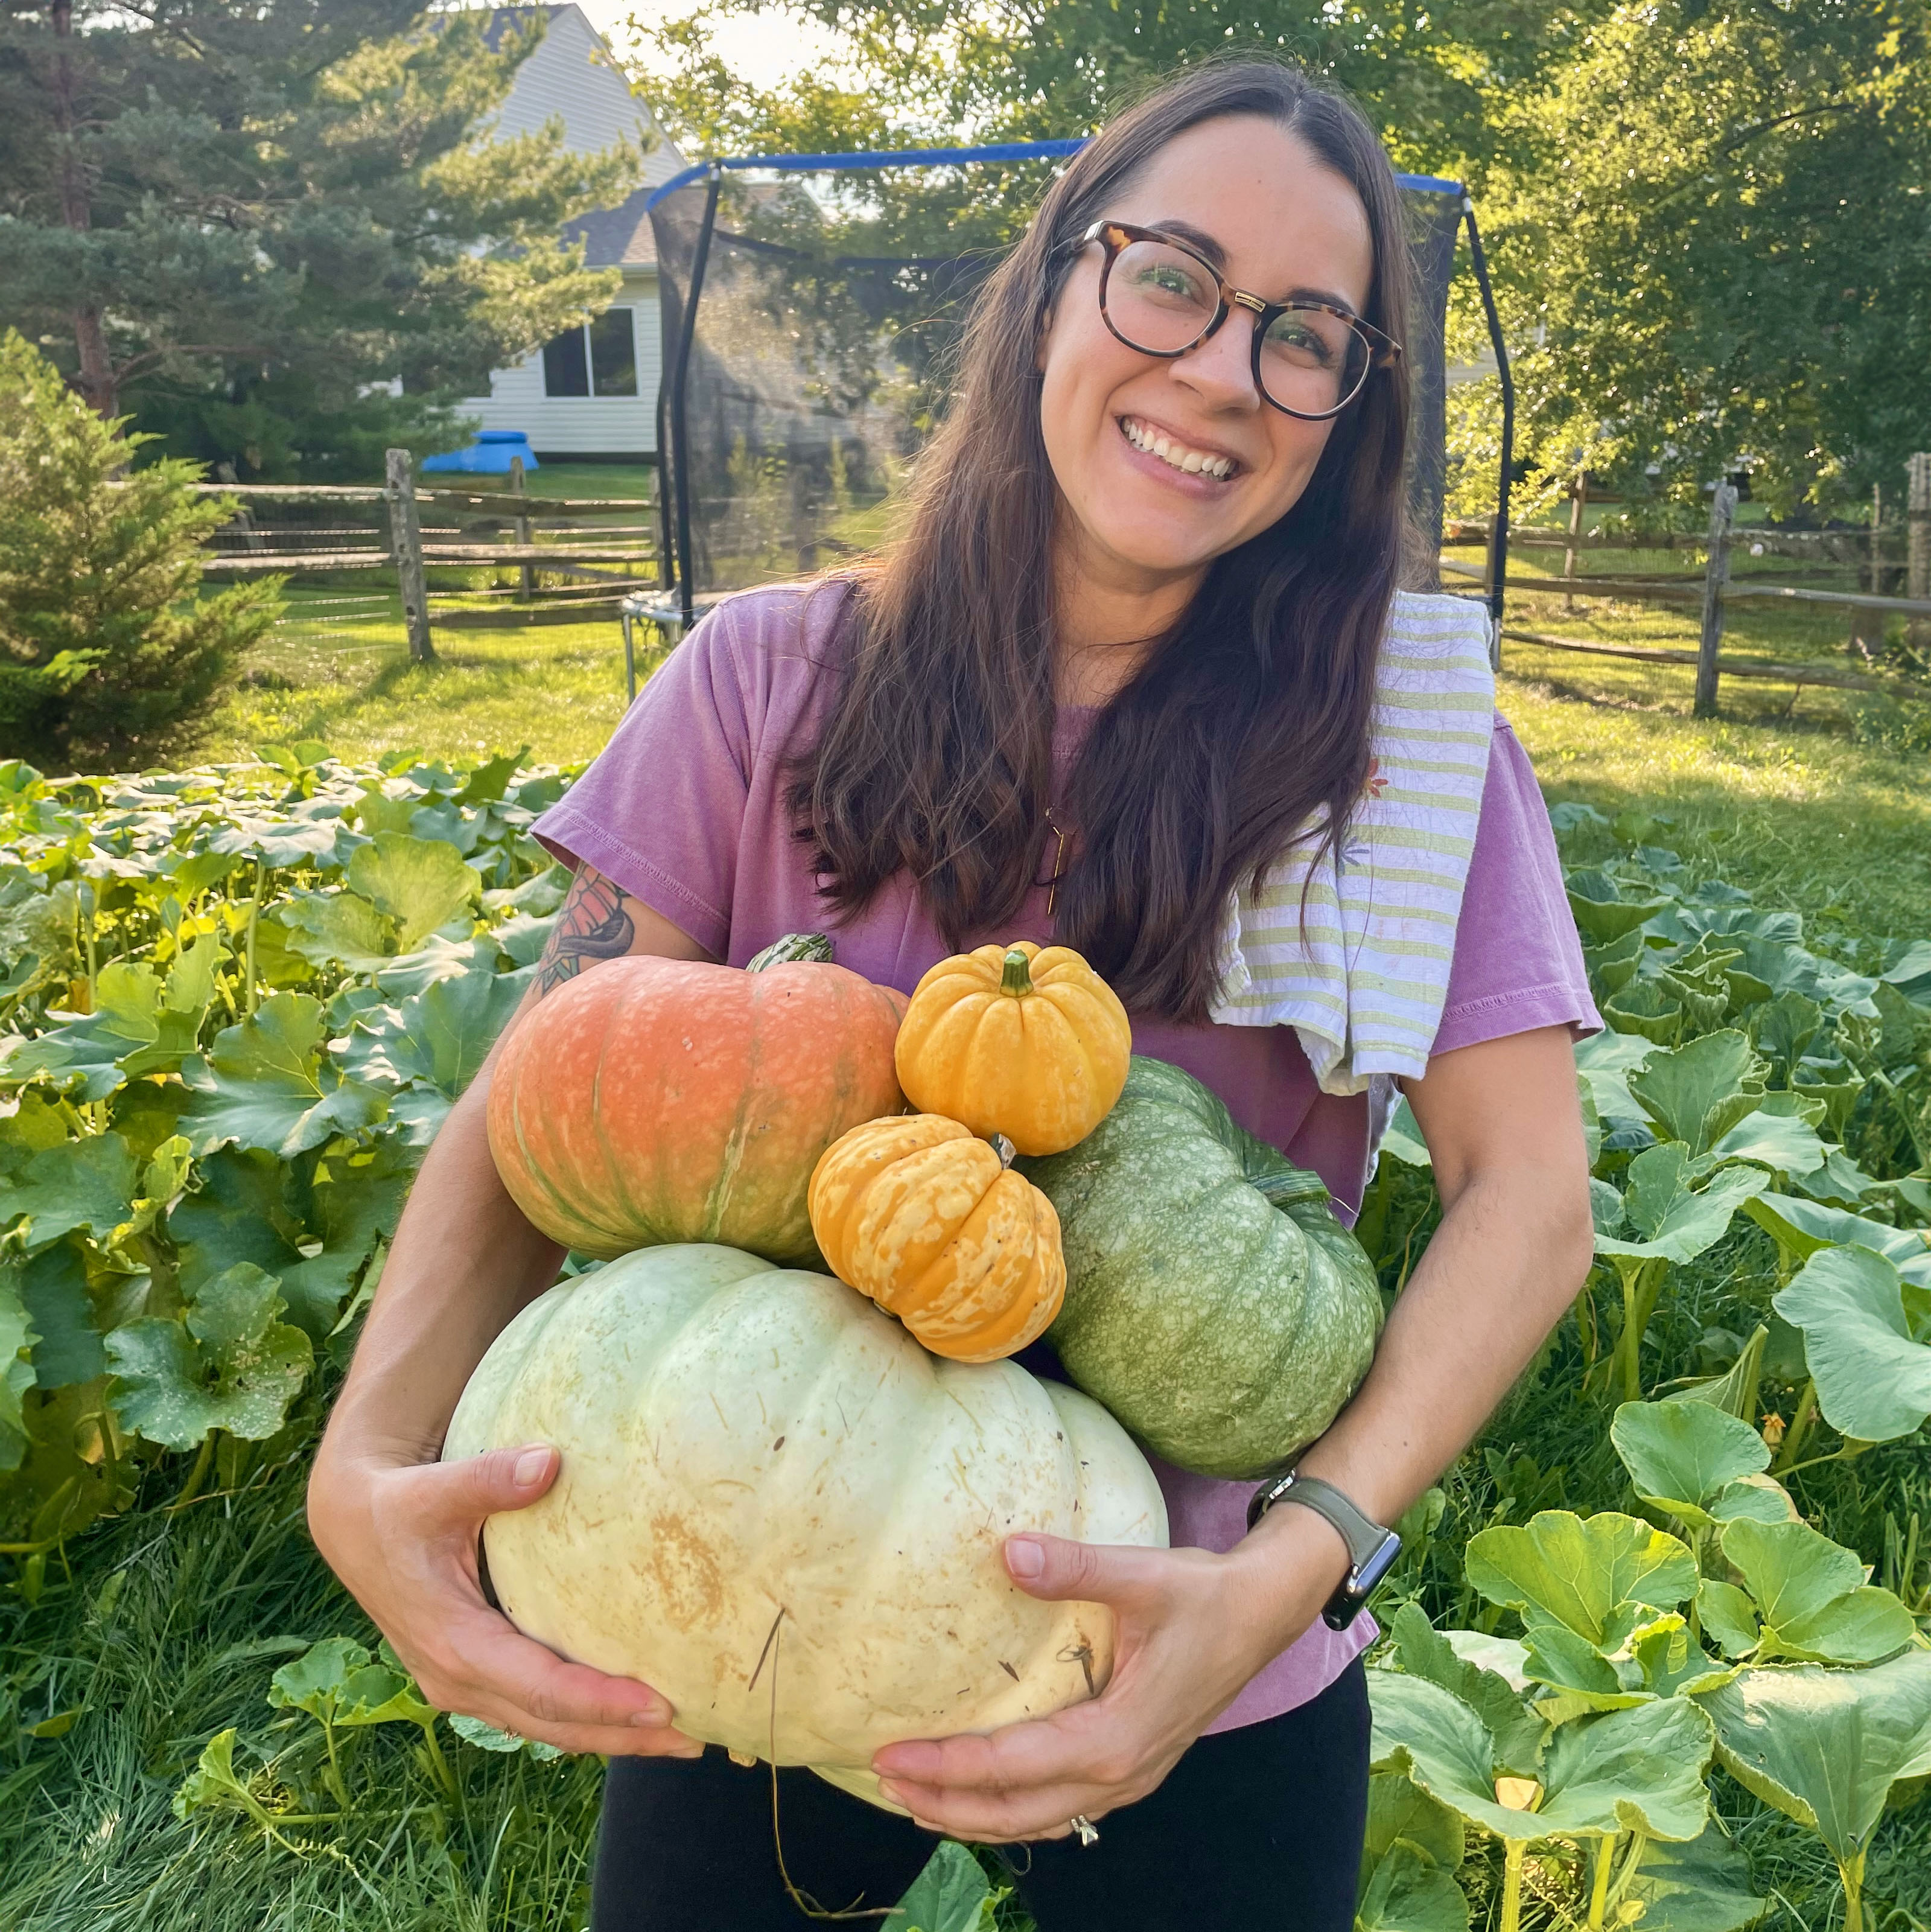 Rhea holds multiple homegrown heirloom pumpkins of various colors and textures.